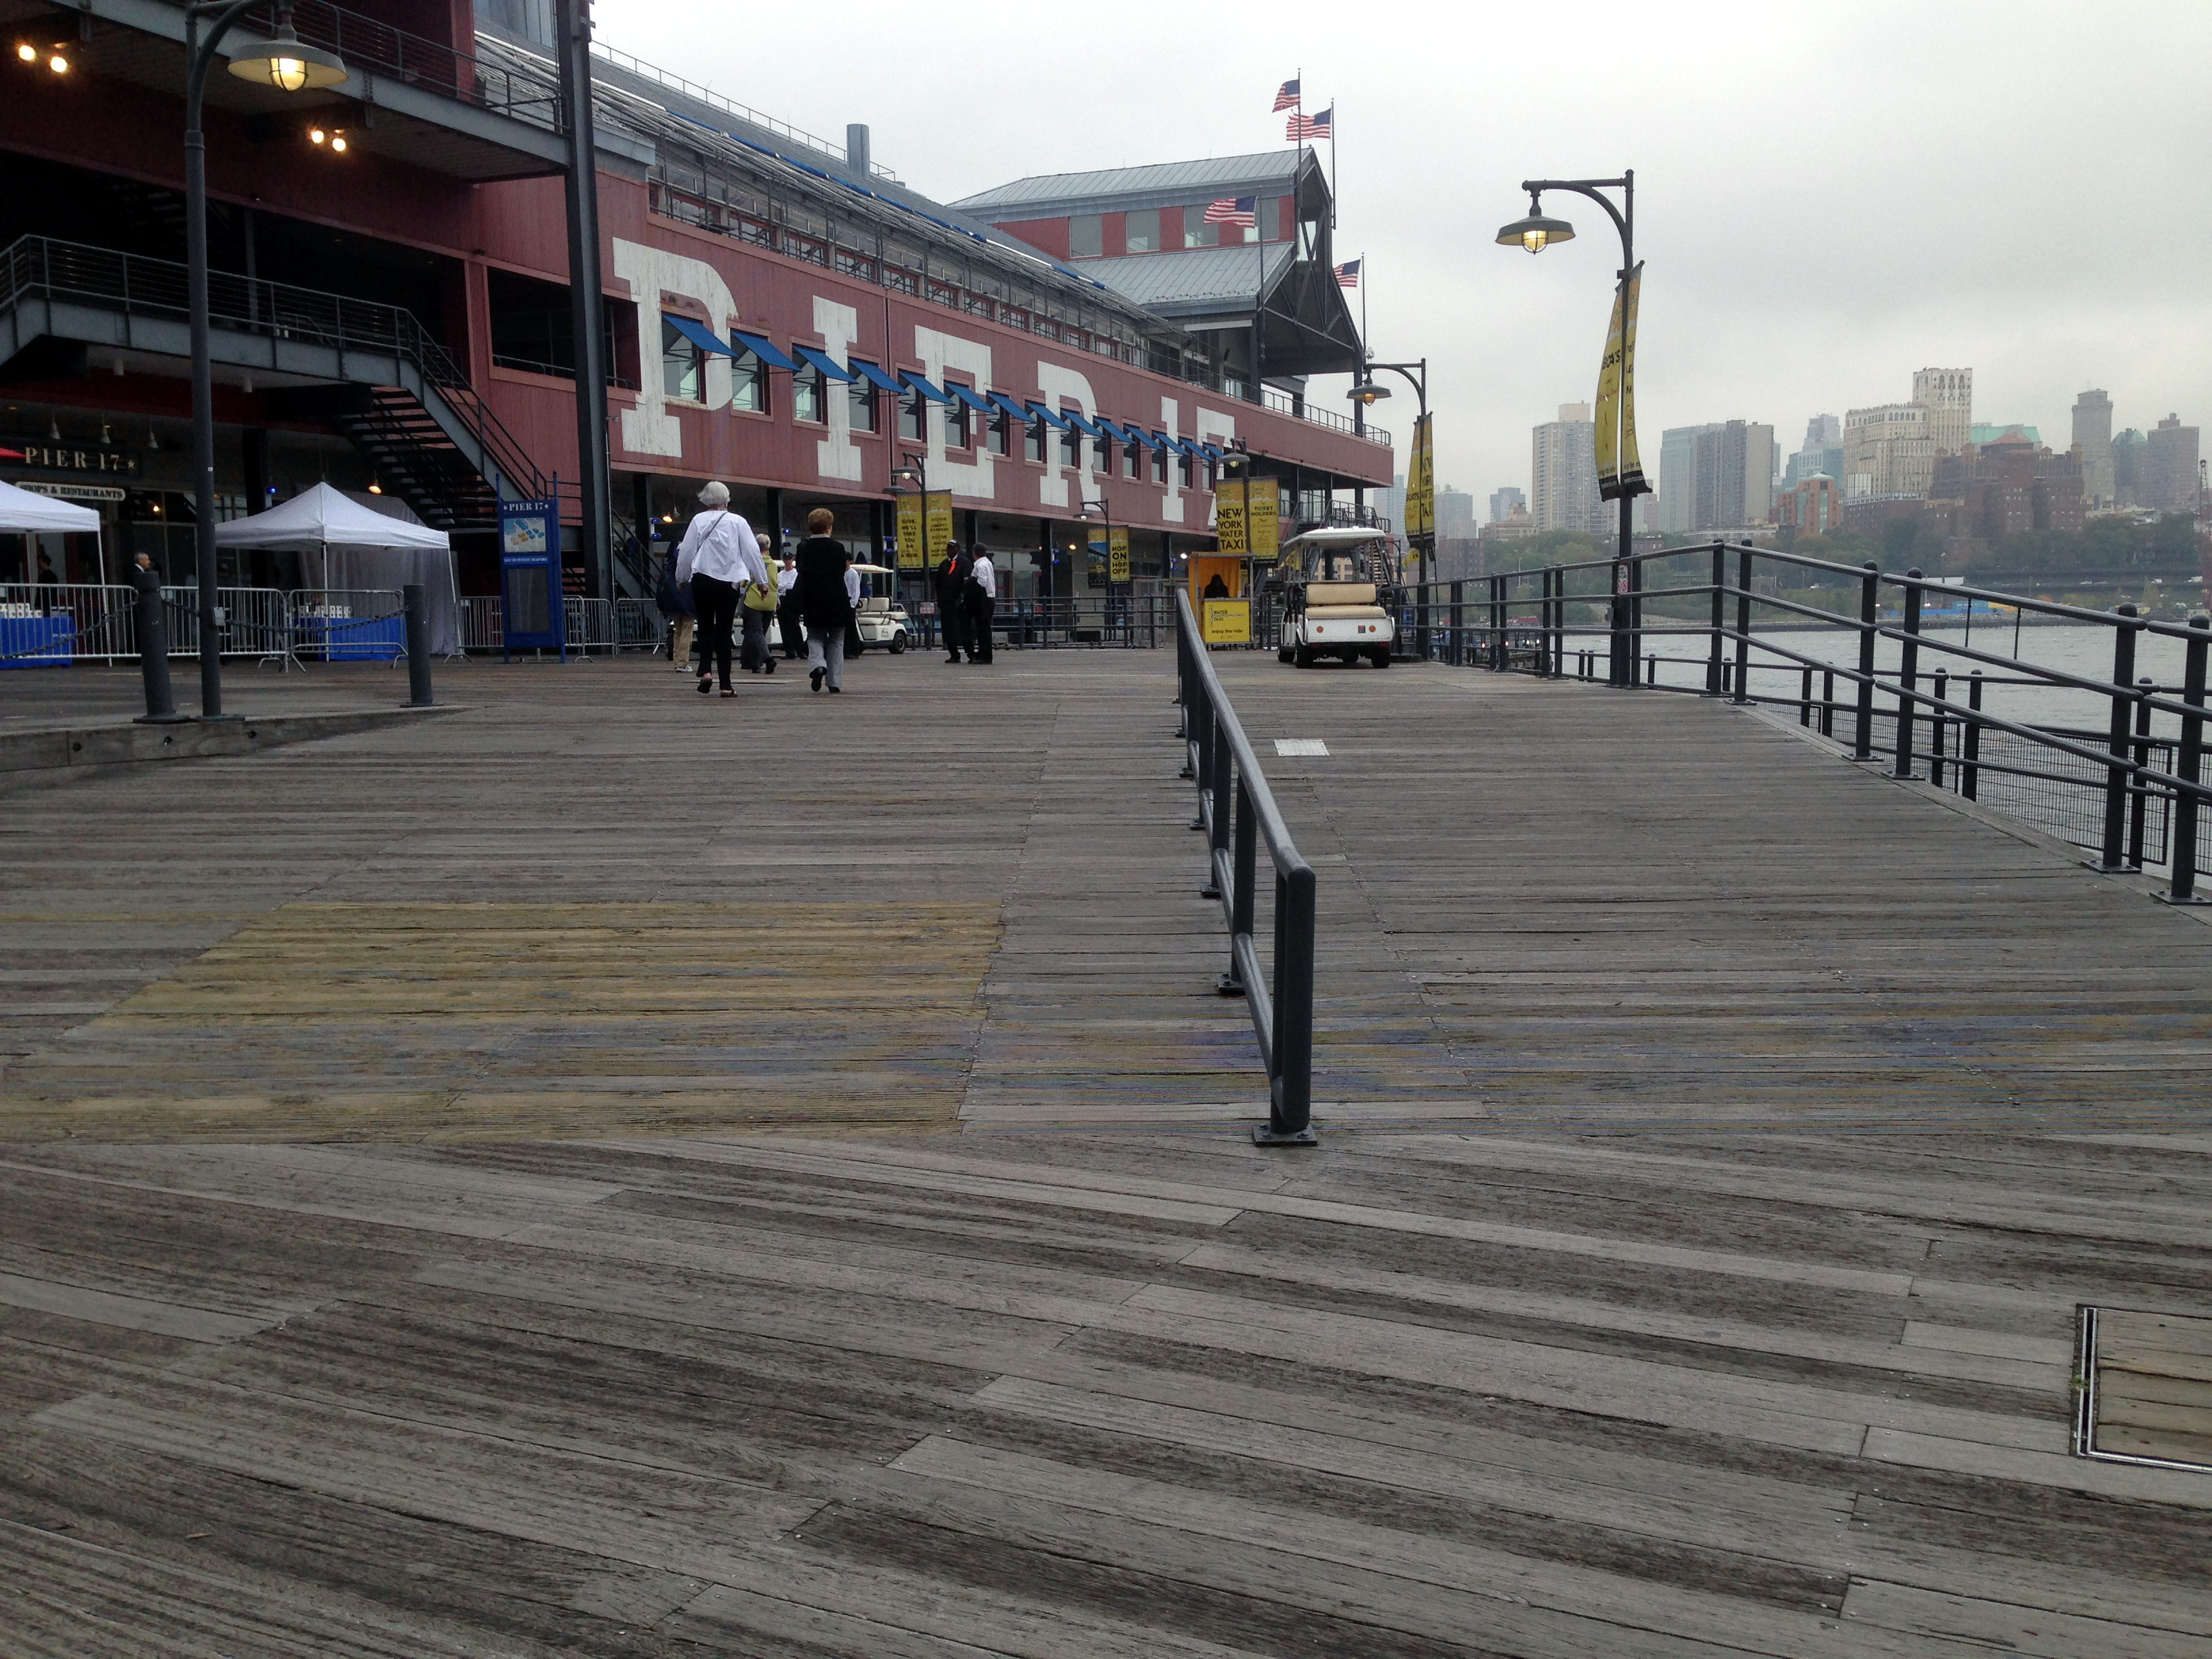 Pier 17 at South Street Seaport, Oct. 17, 2013. (credit: Peter Haskell/WCBS 880)